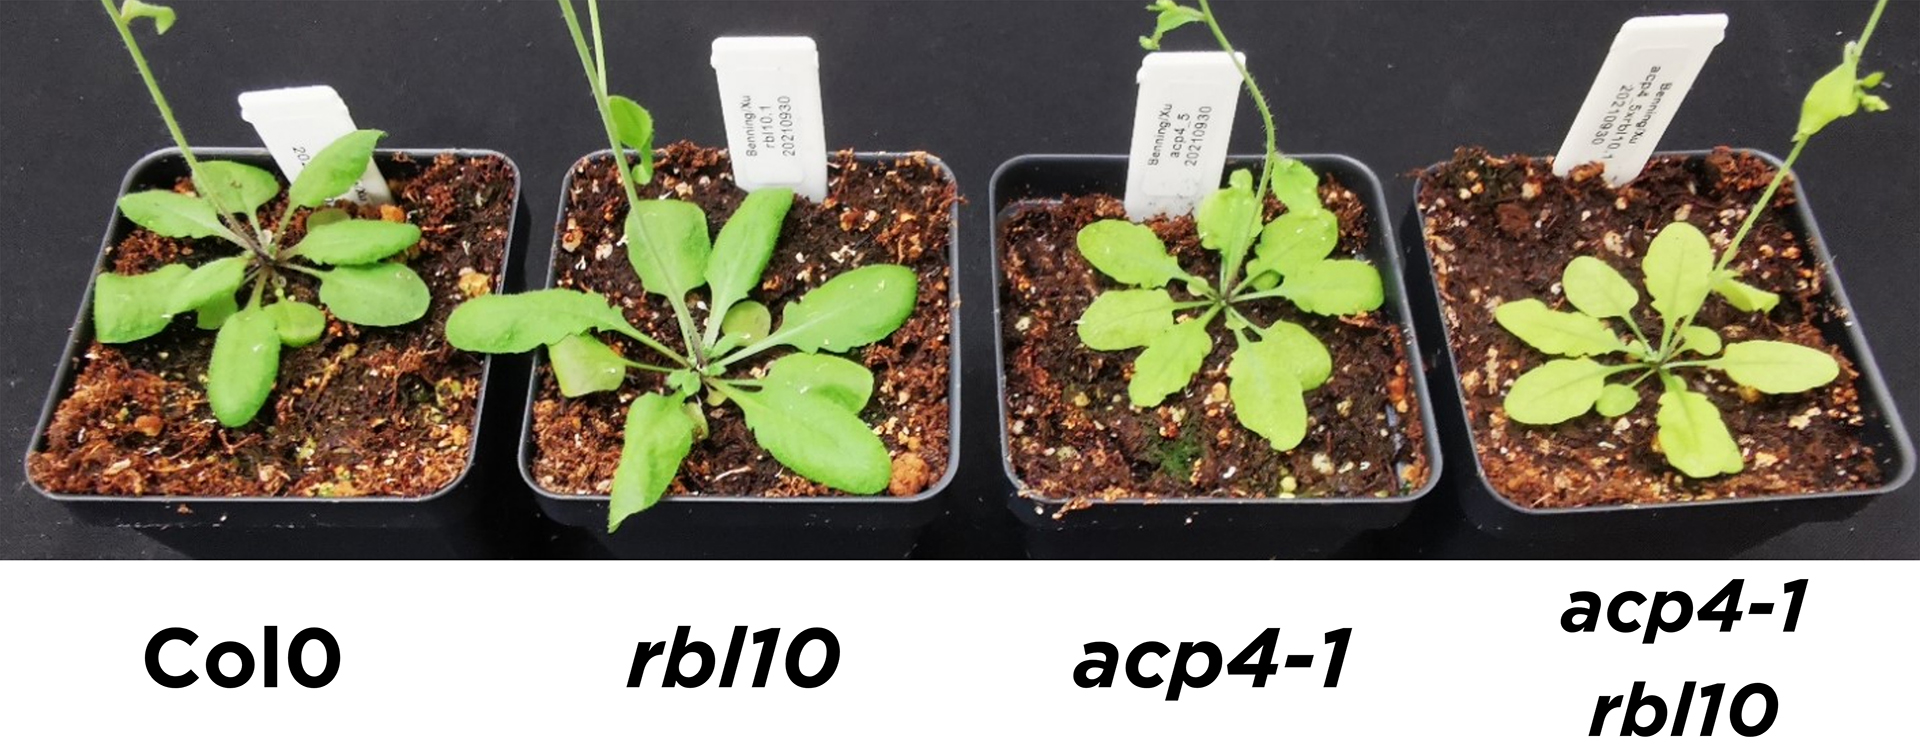 Four Arabidopsis plants, labeled left to right as Col0, rbl10, acp4-1, and acp4-1 rbl10.